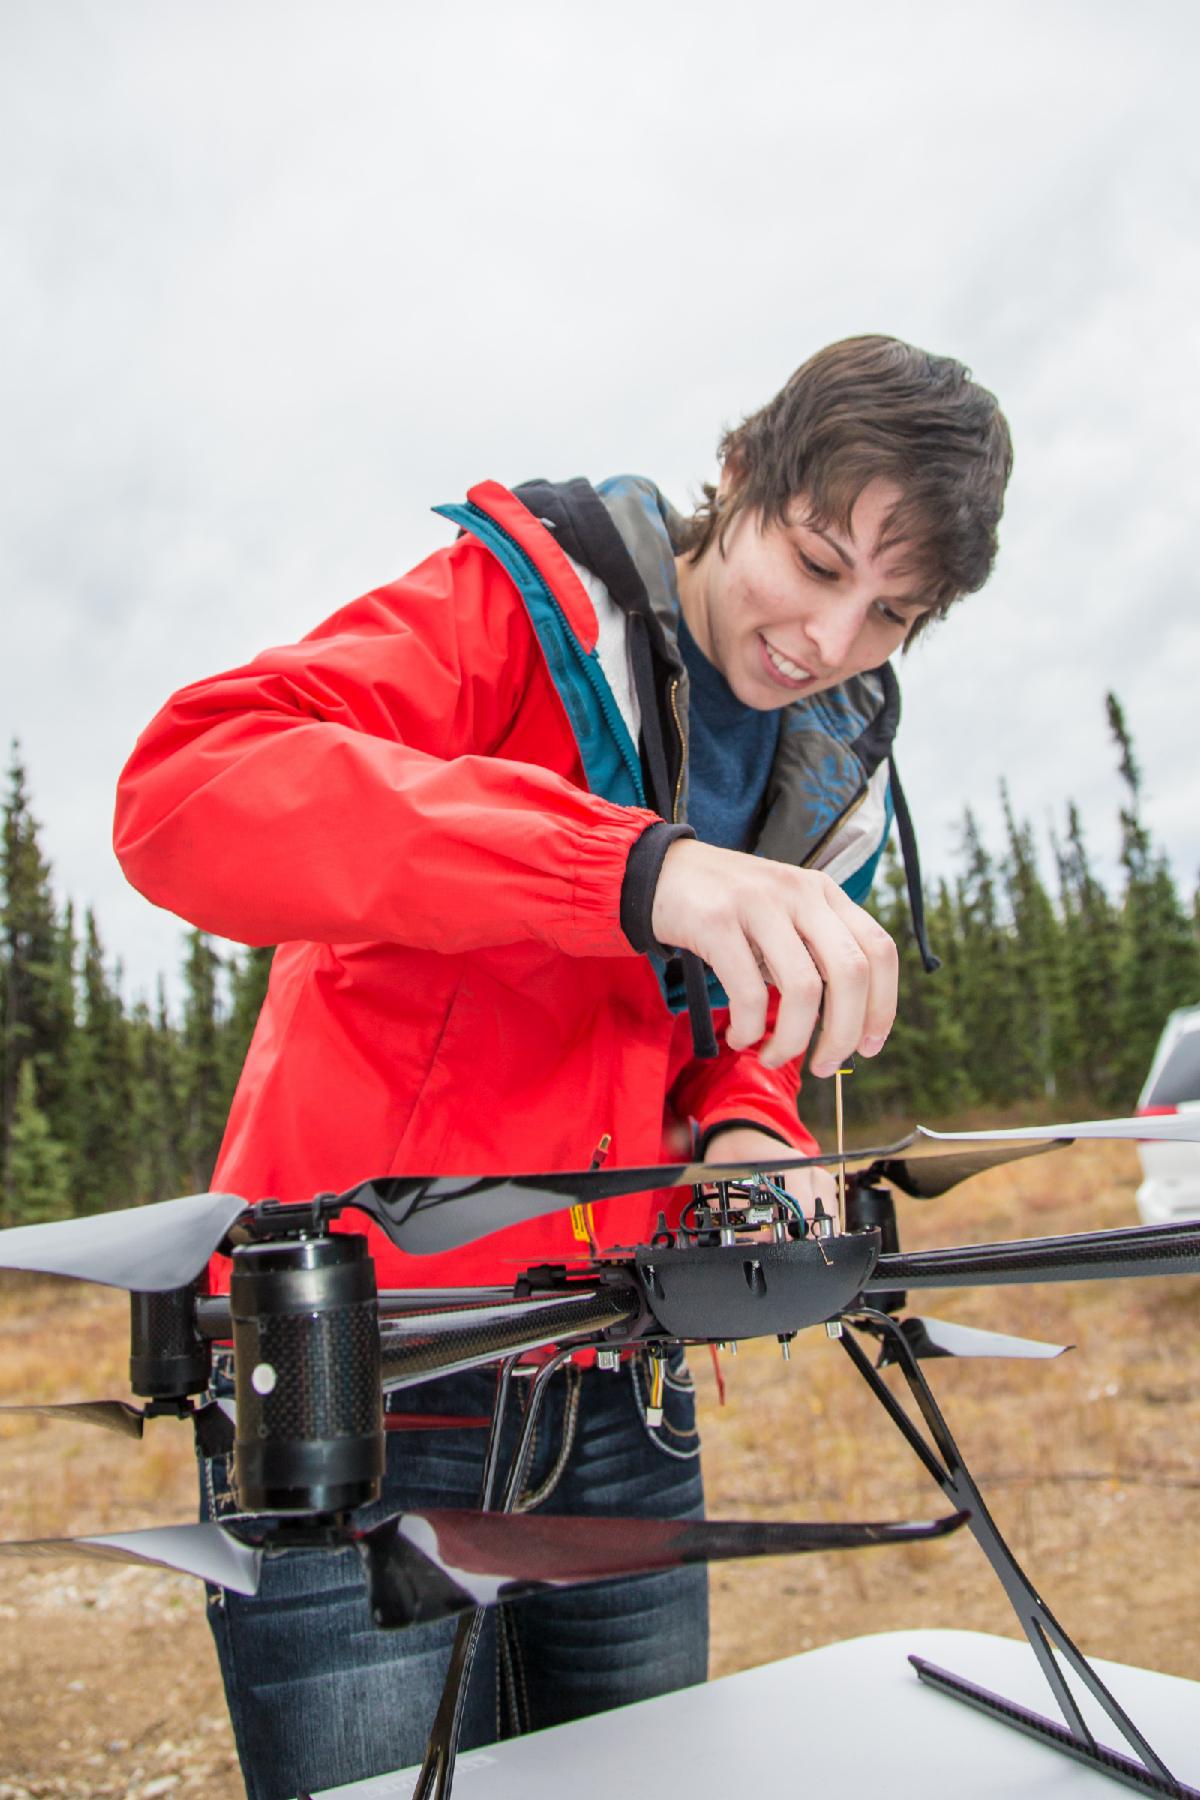 Students take part in a project using unmanned aerial vehicles (UAVs) 